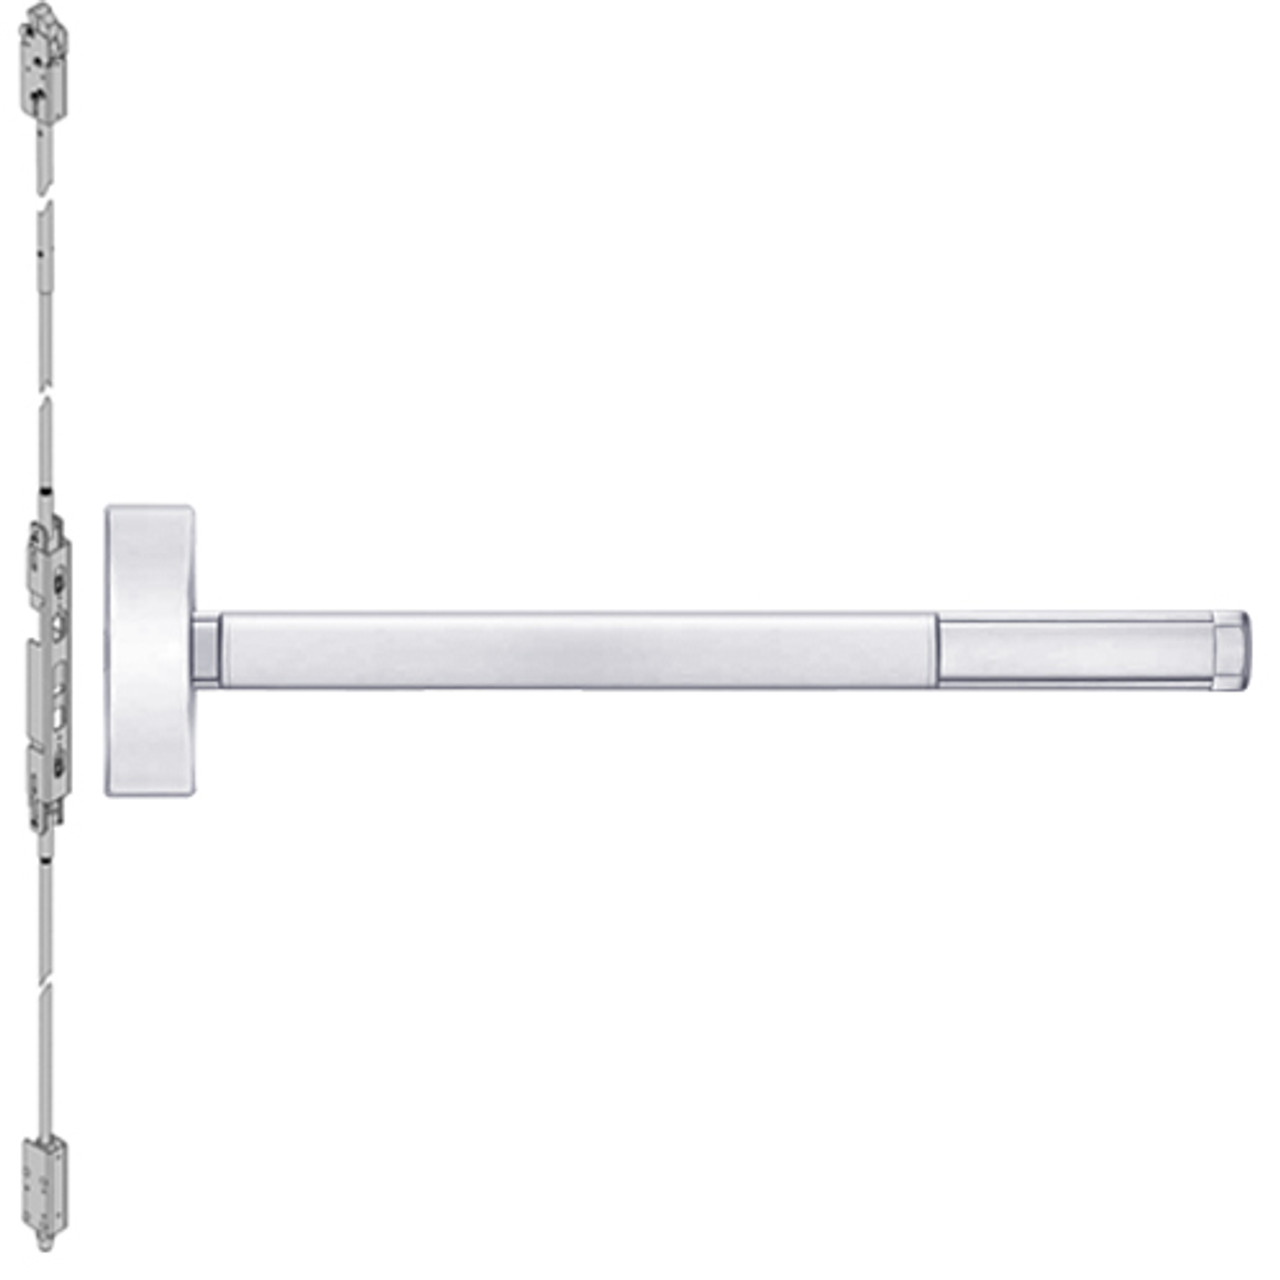 TSFL2801-625-36 PHI 2800 Series Fire Rated Concealed Vertical Rod Exit Device with Touchbar Monitoring Switch Prepped for Cover Plate in Bright Chrome Finish